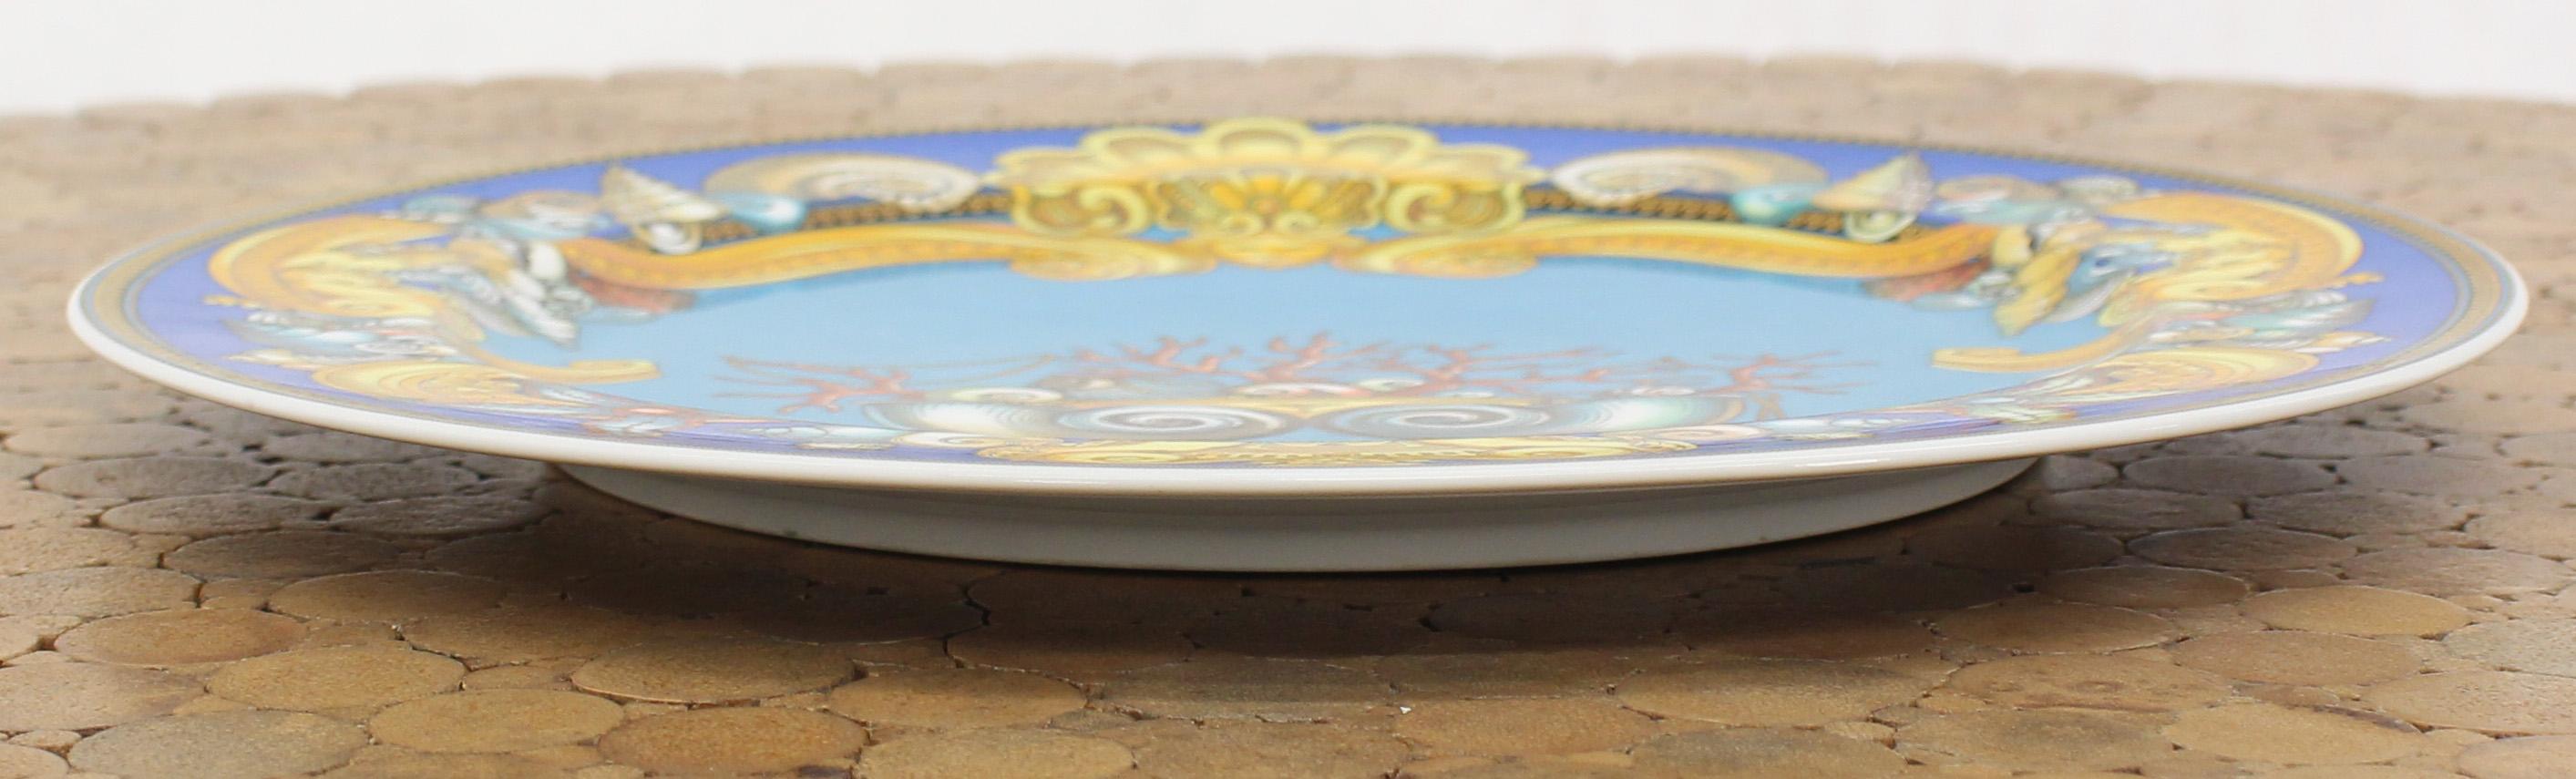 Italian Rosenthal Versace Porcelain Charger Plate For Sale